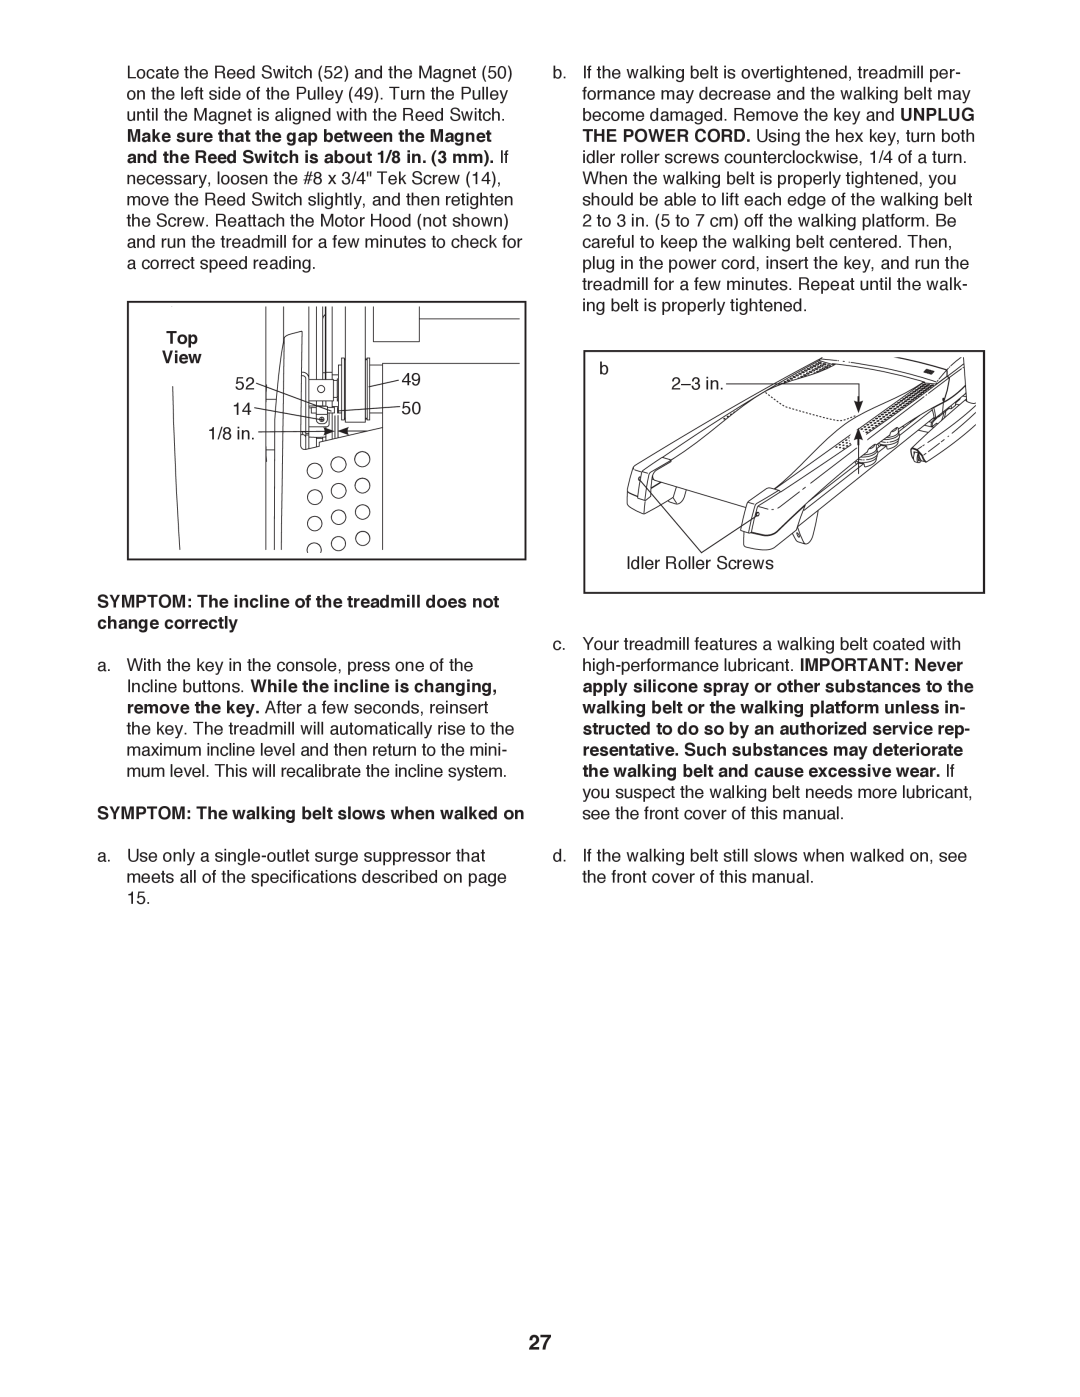 ProForm 795 user manual Top View, SYMPTOM The incline of the treadmill does not change correctly 